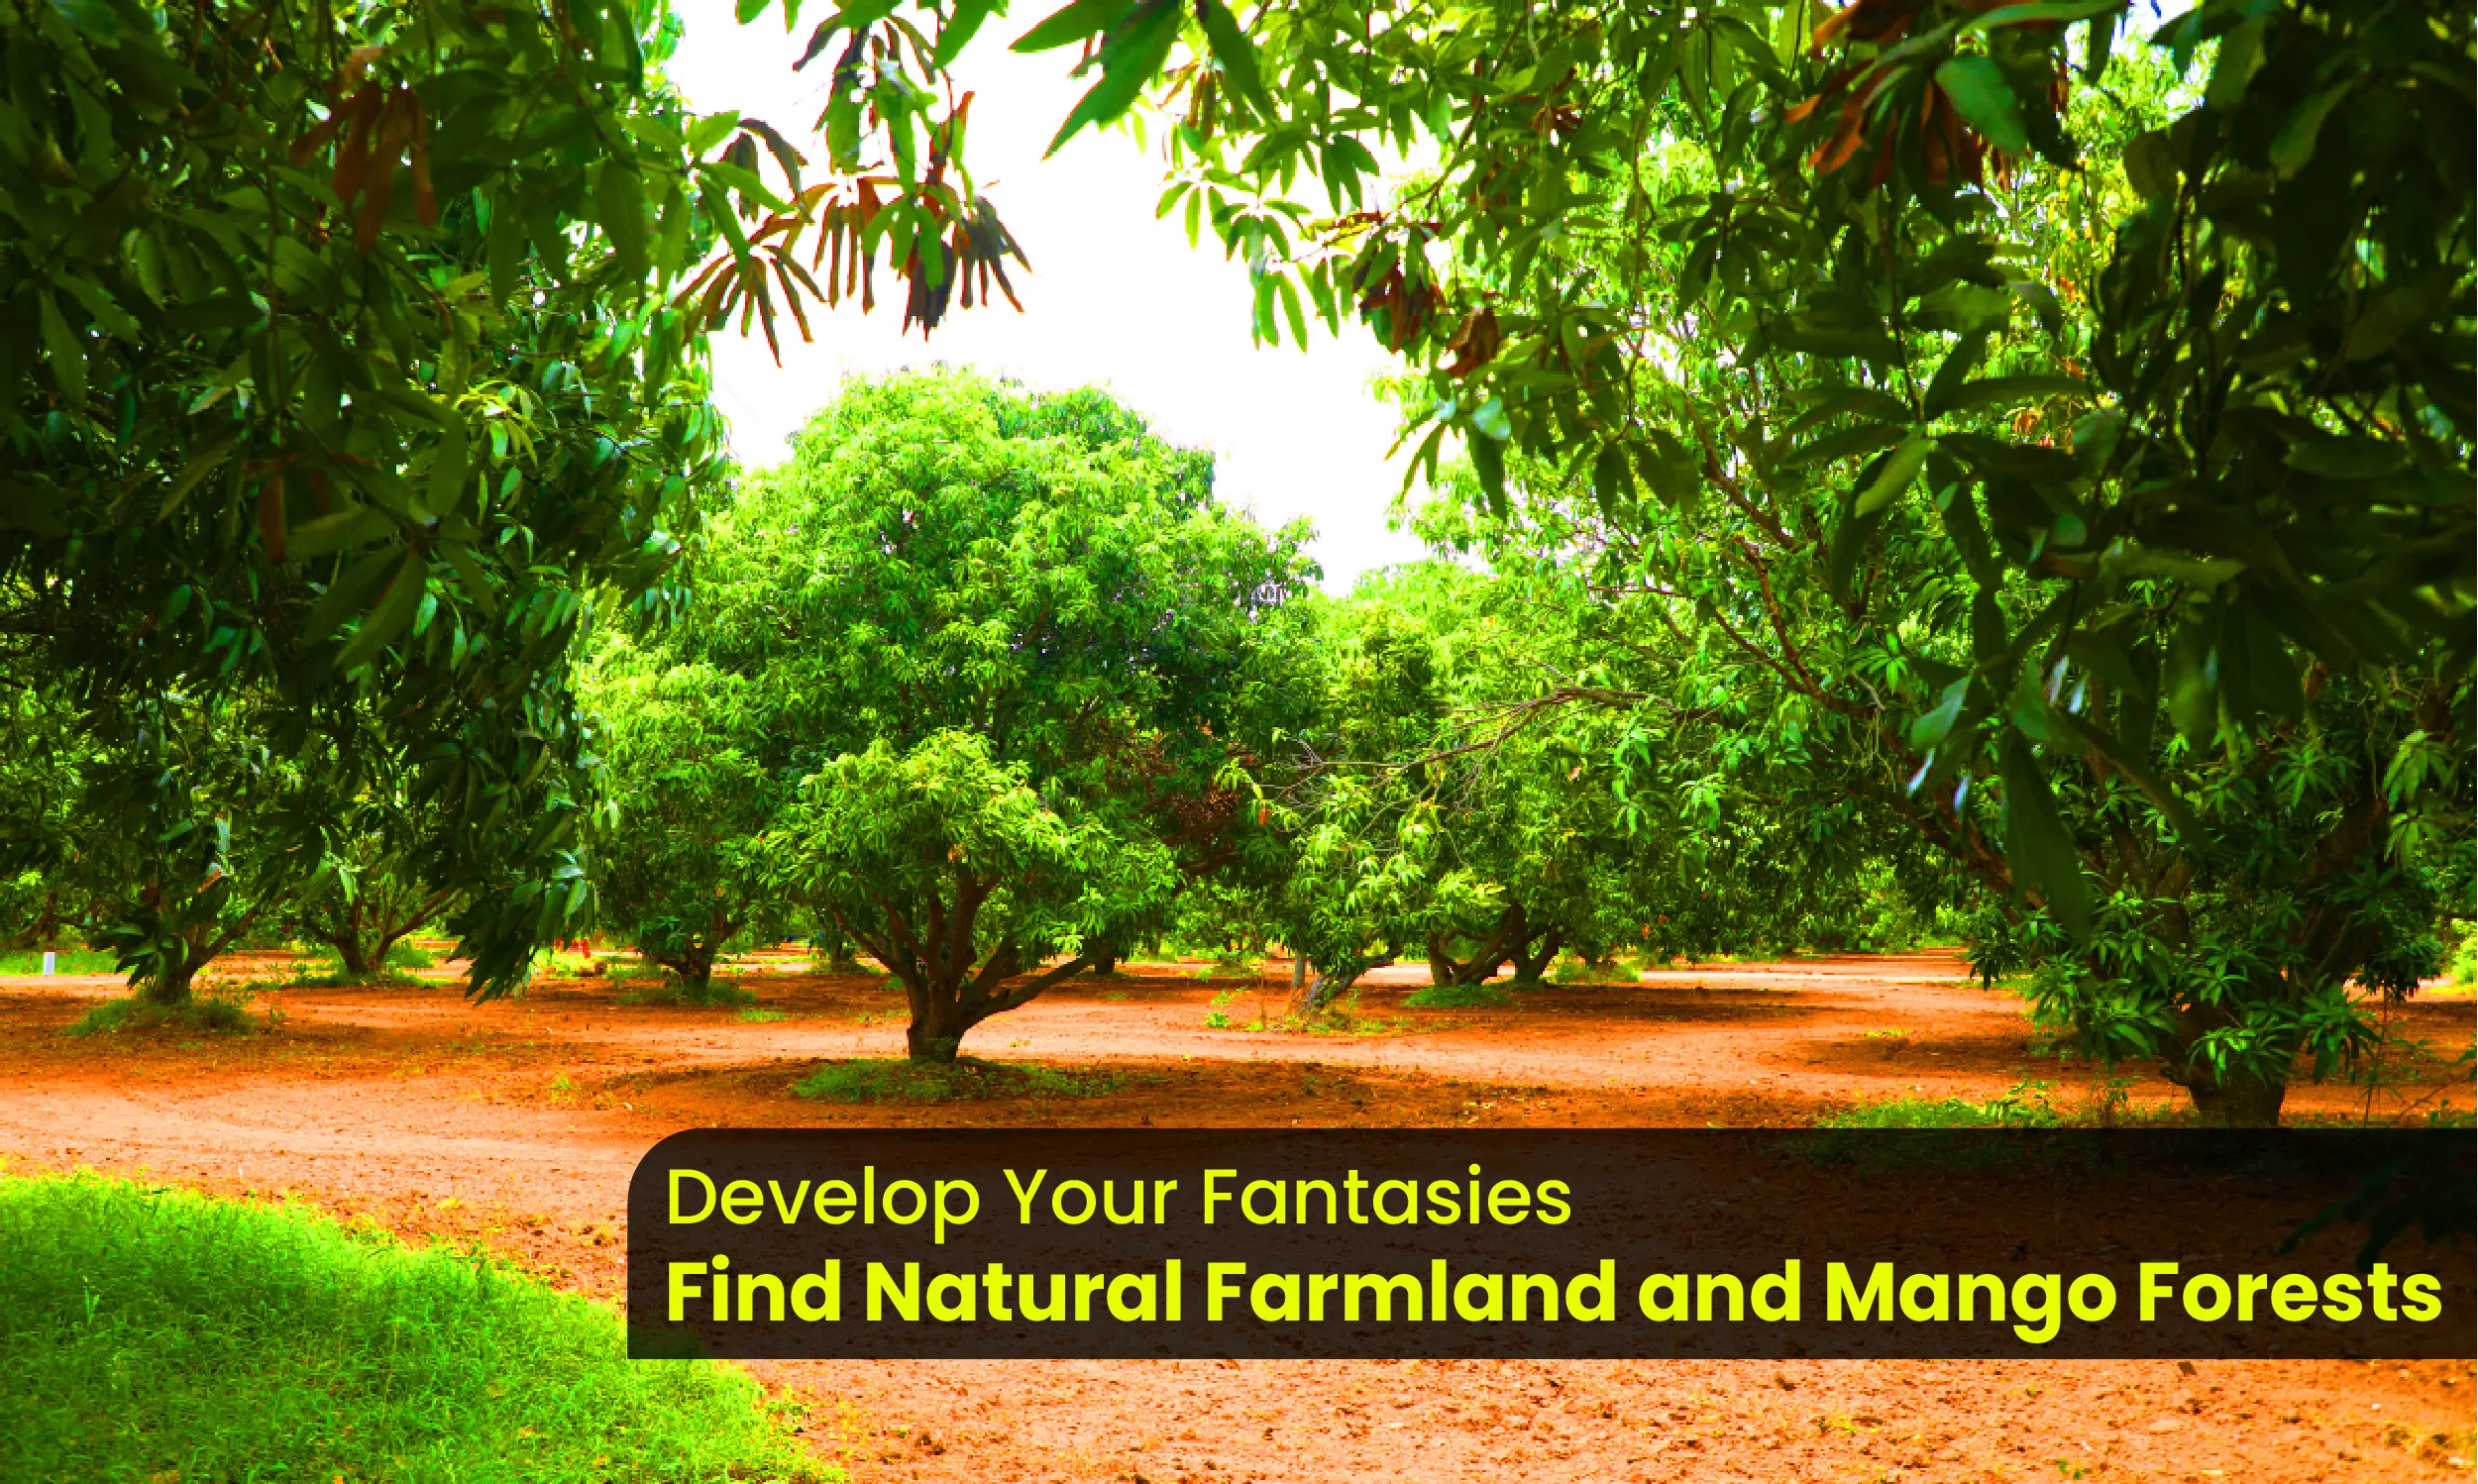 Develop your fantasies by discovering natural farmland and mango forests